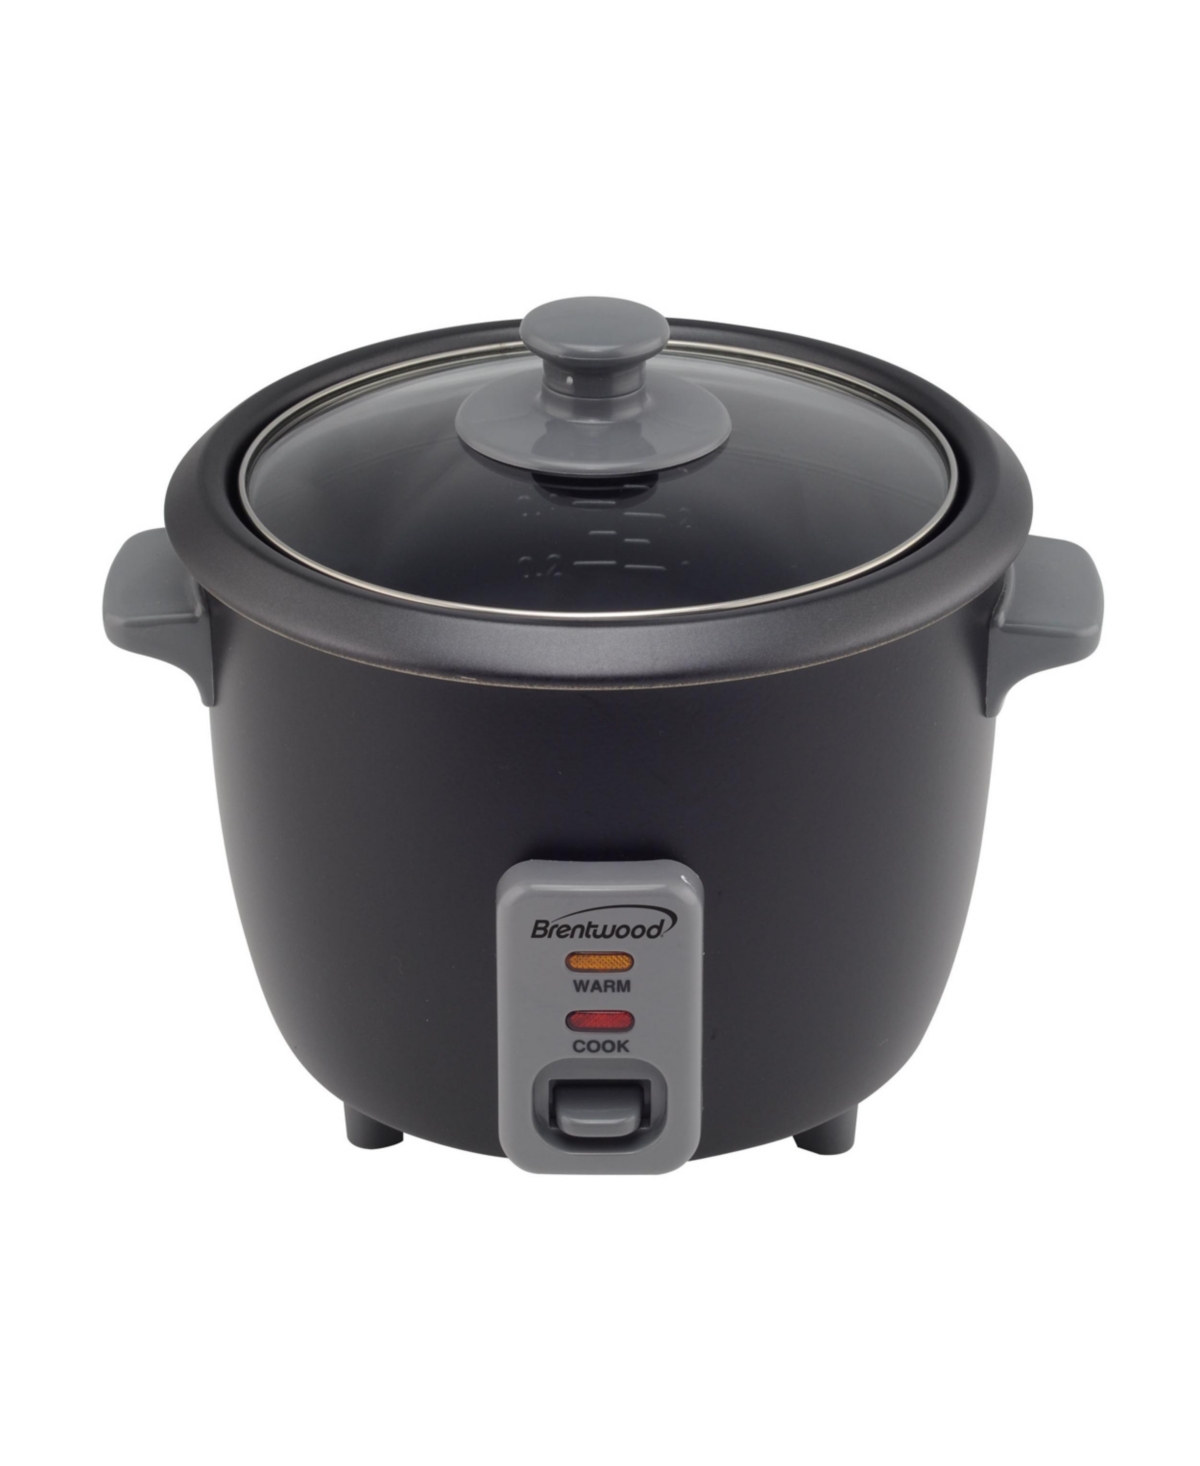 Brentwood 4 Cup One Touch Electric Rice Cooker in Black - Black